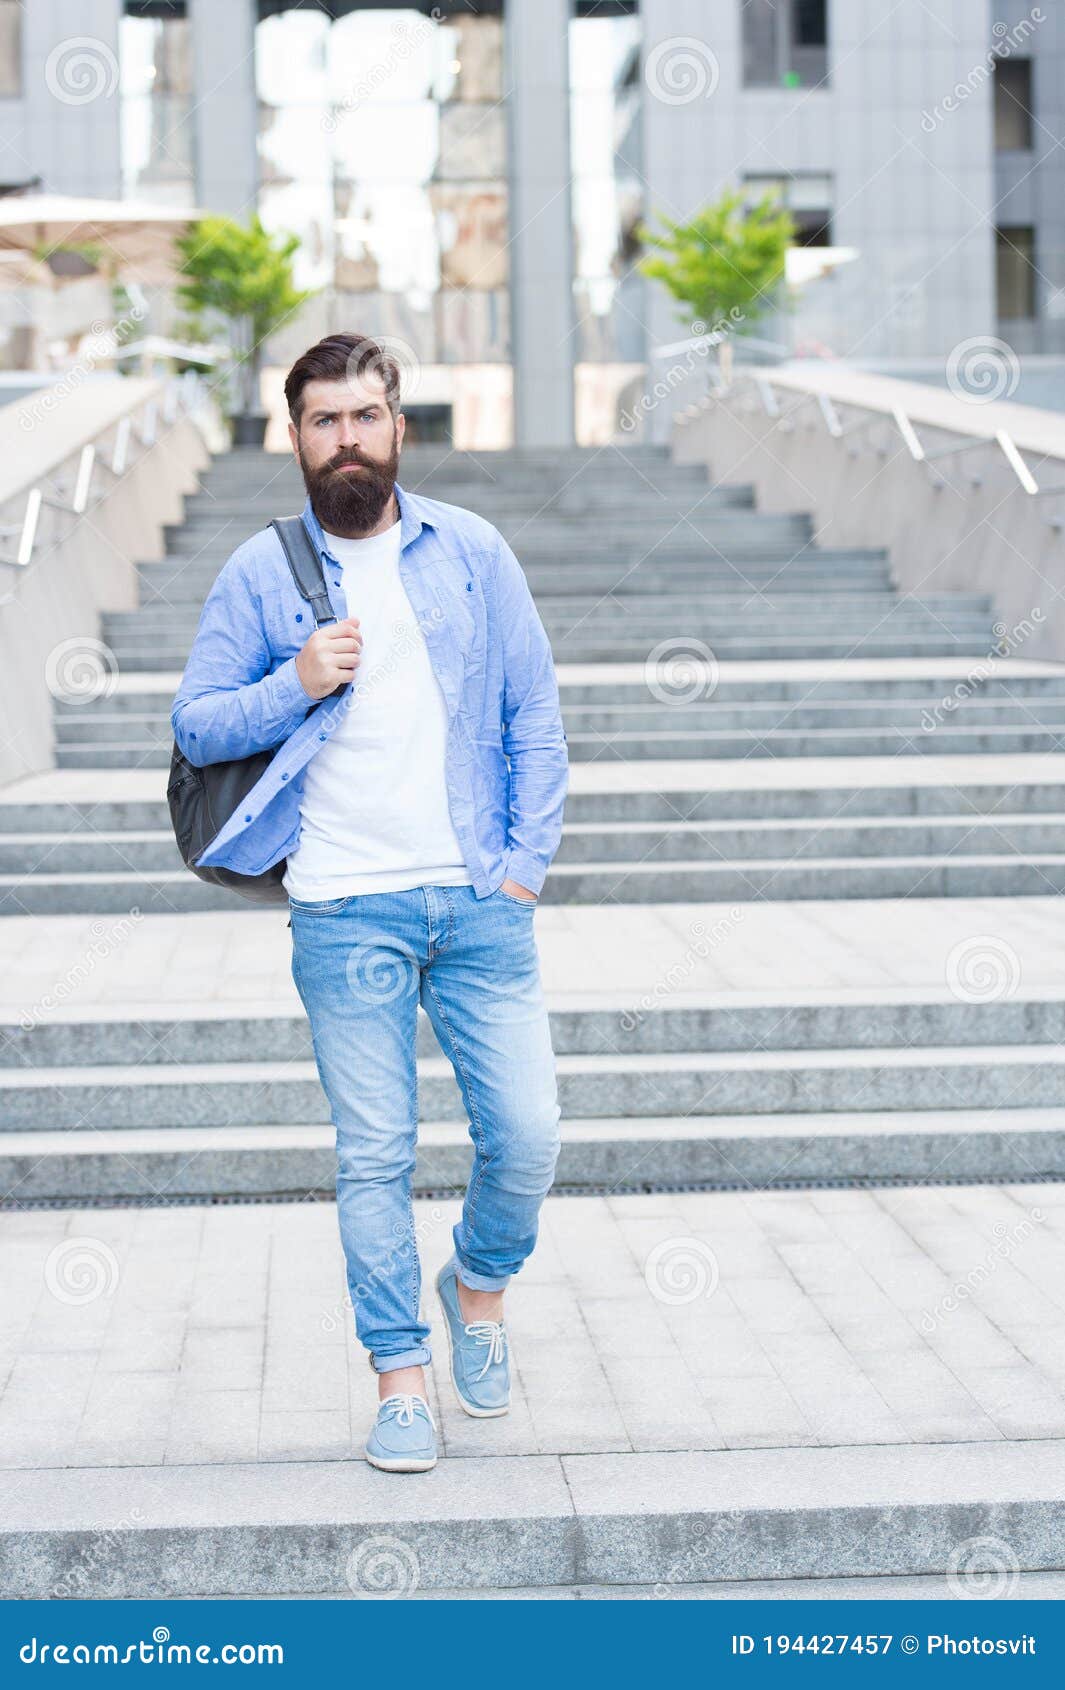 https://thumbs.dreamstime.com/z/summer-bearded-man-go-downstairs-outdoors-hipster-wear-fashion-style-casual-outfit-urban-lifestyle-trendy-wardrobe-men-194427457.jpg